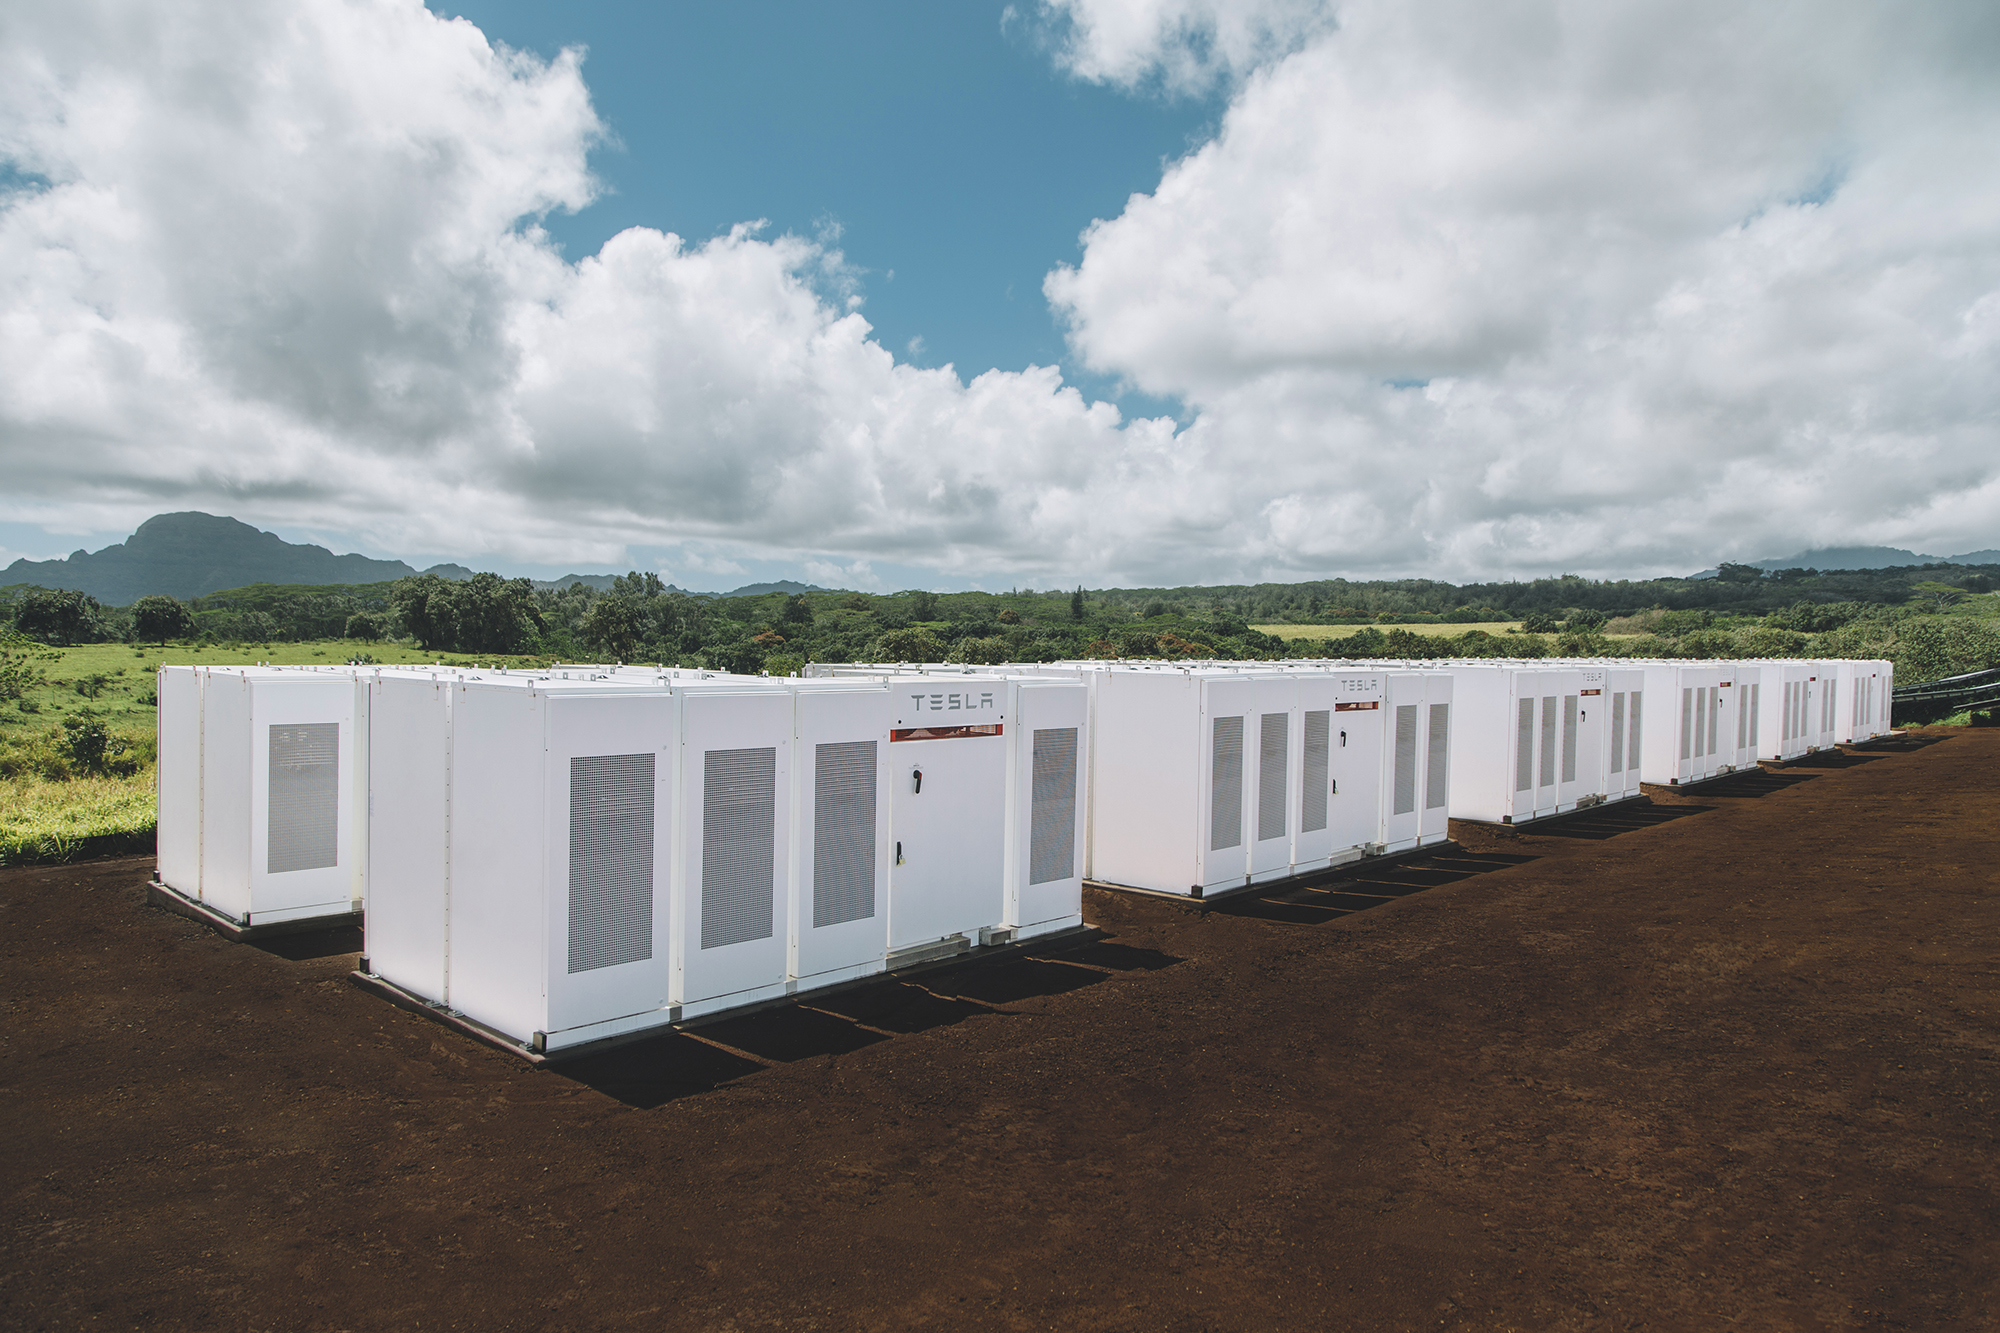 This Tesla Powerpack helped KIUC earn the top spot for the most new energy storage watts per member in the new SEPA Top 10. (Photo By: KIUC)